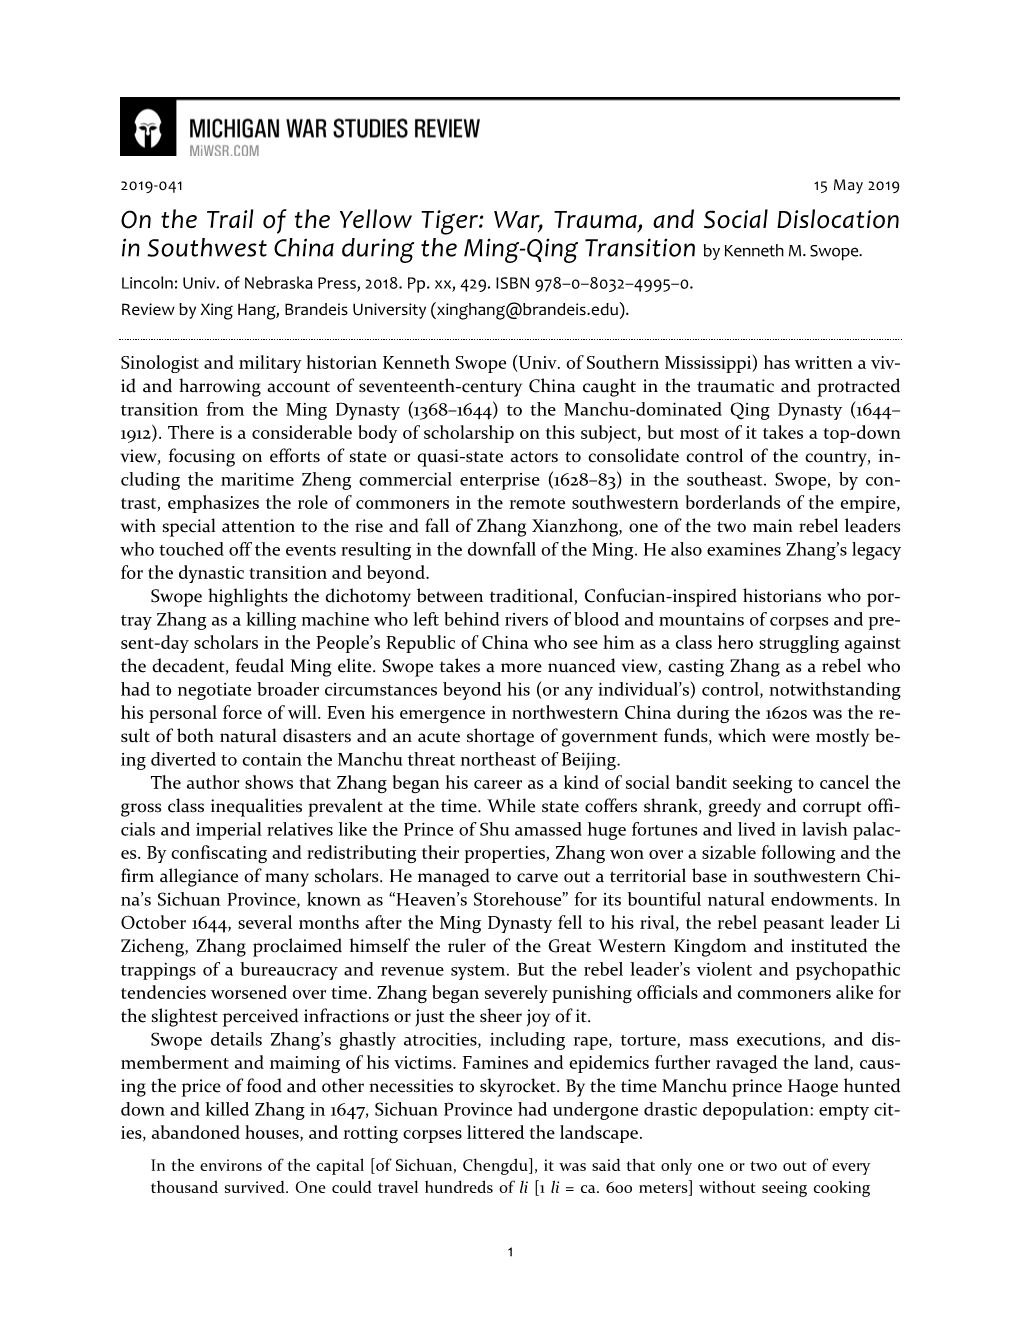 War, Trauma, and Social Dislocation in Southwest China During the Ming-Qing Transition by Kenneth M